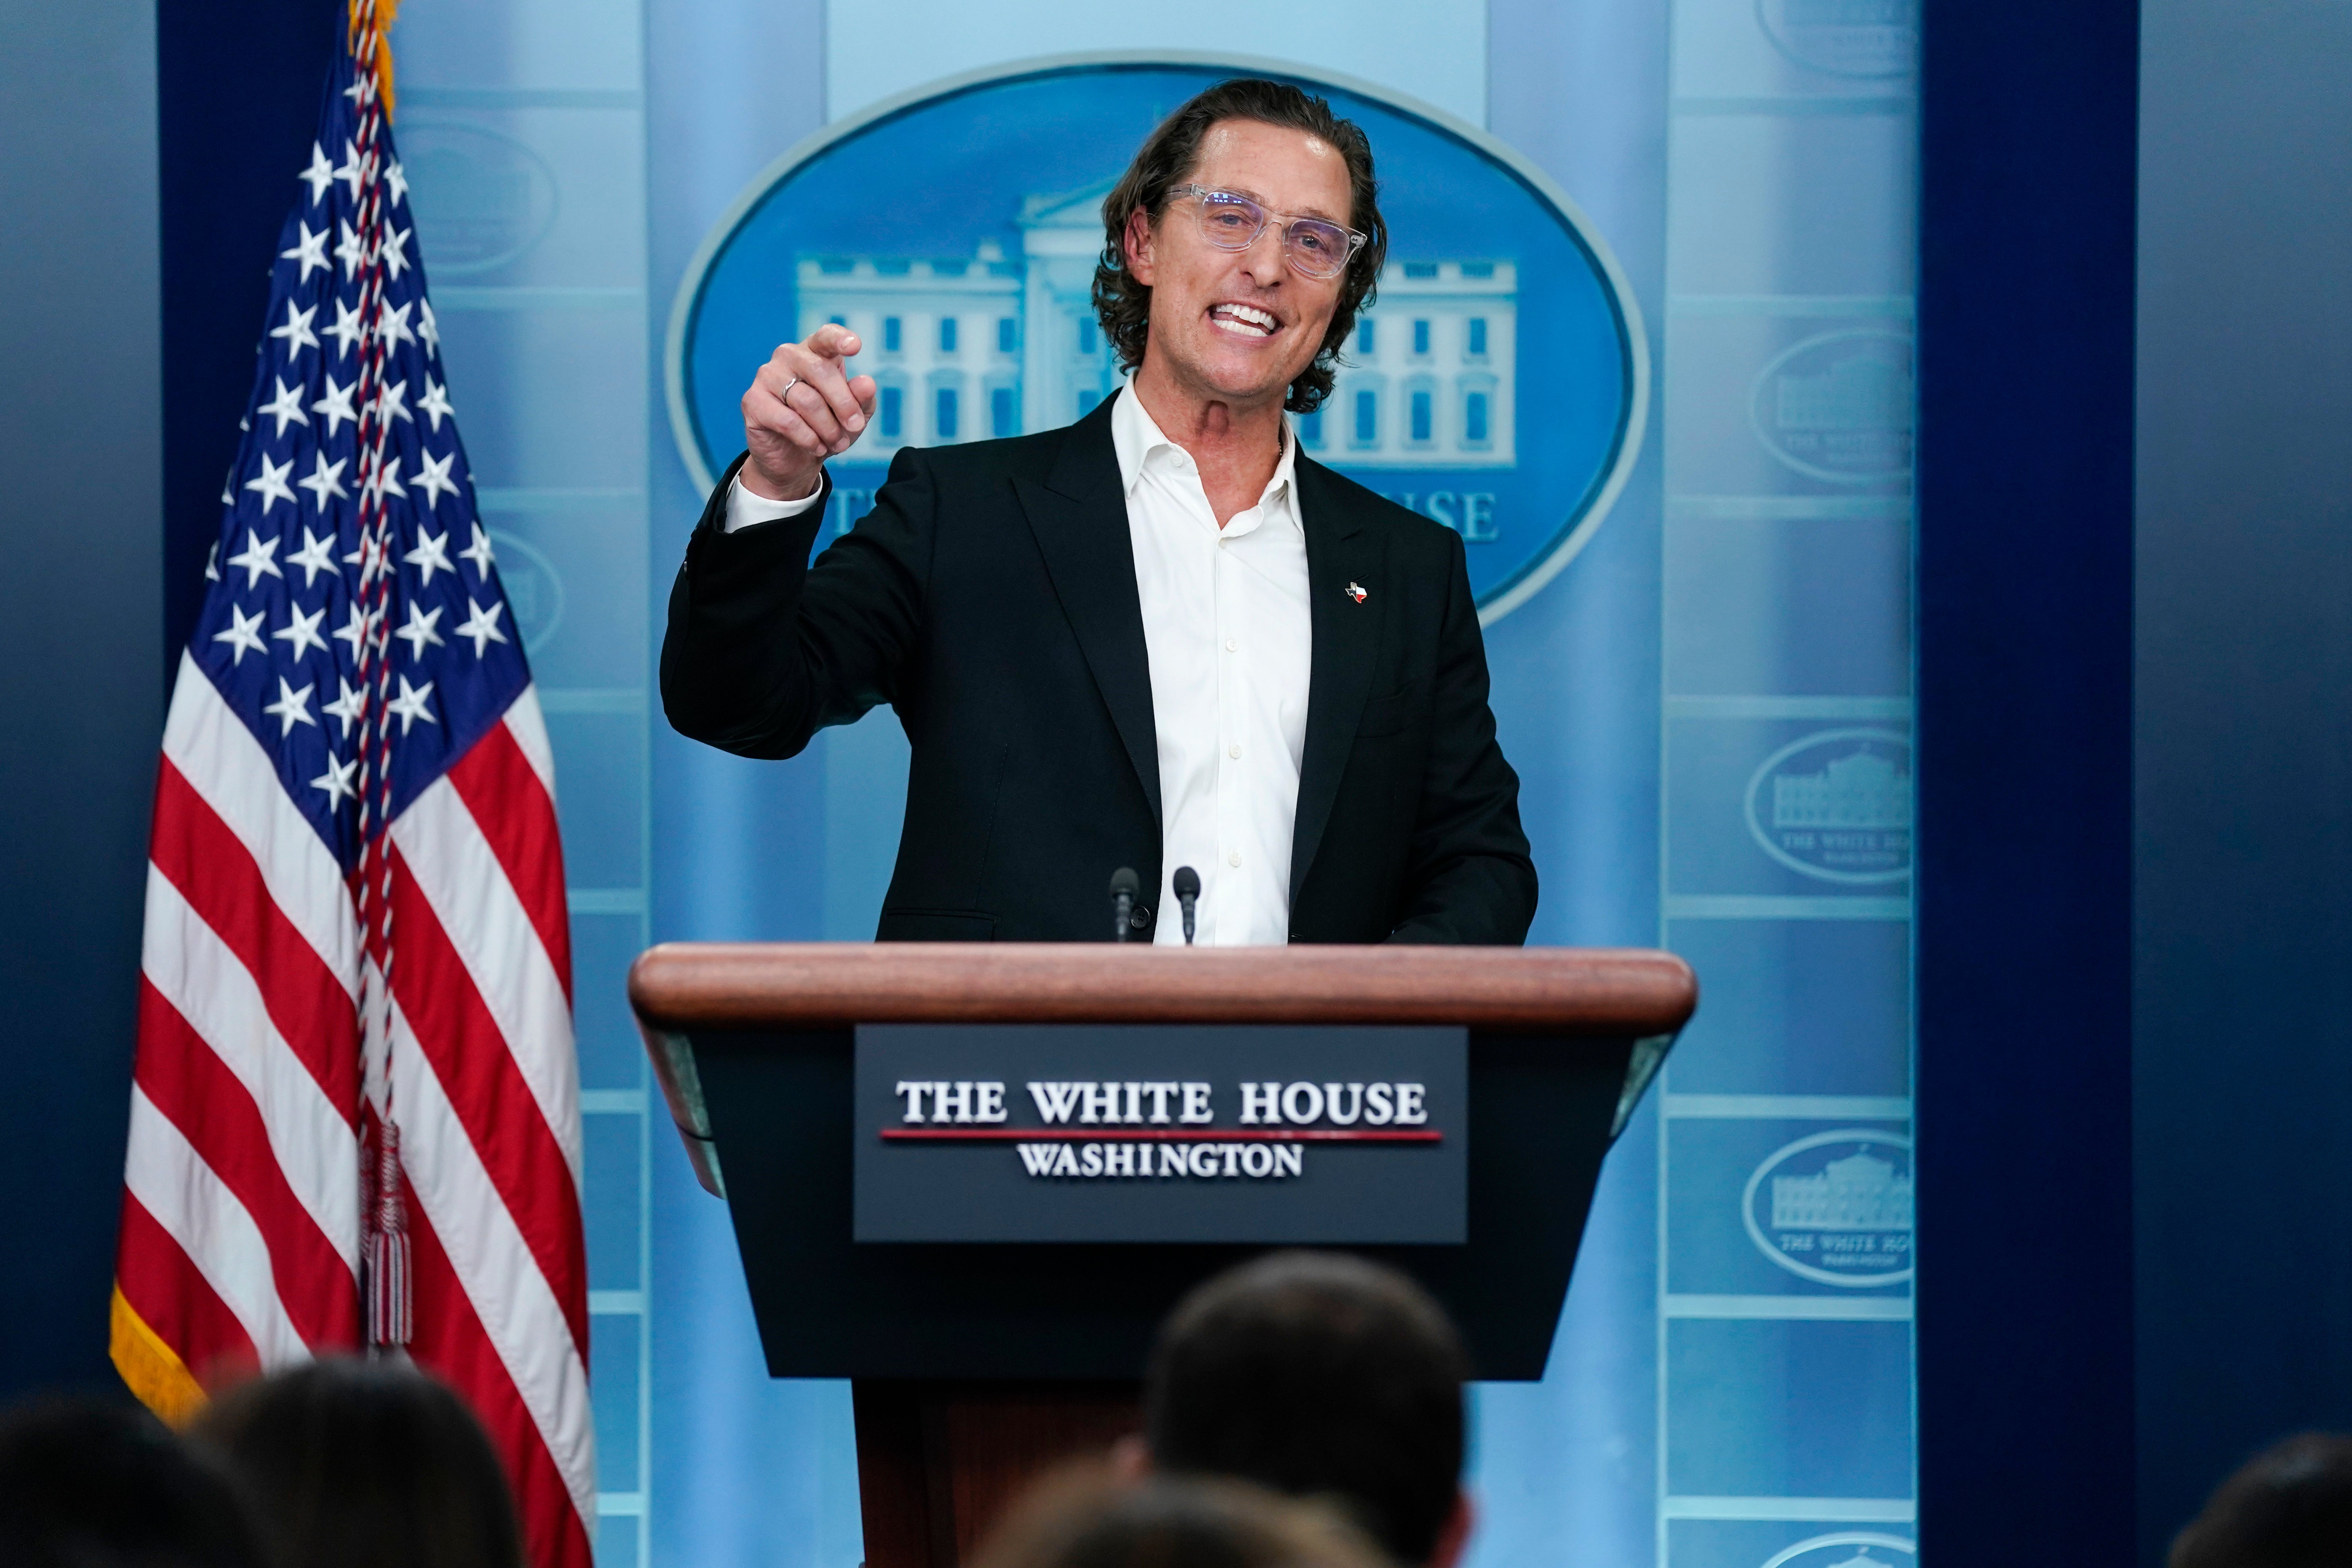 Oscar-winning actor and Uvalde native Matthew McConaughey delivers a speech about gun control at the White house